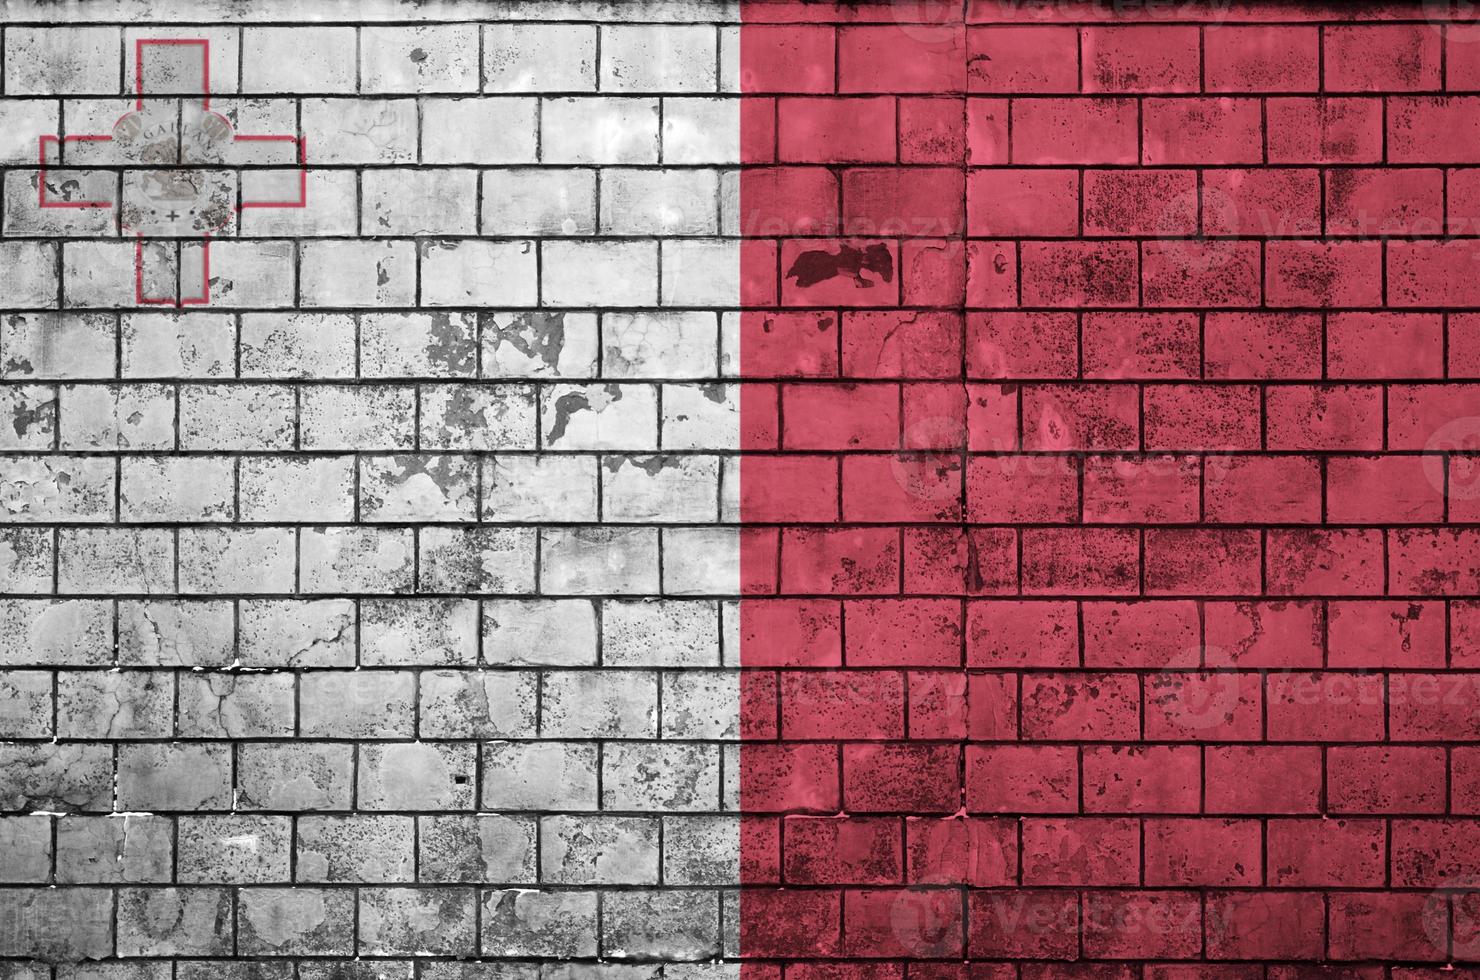 Malta flag is painted onto an old brick wall photo